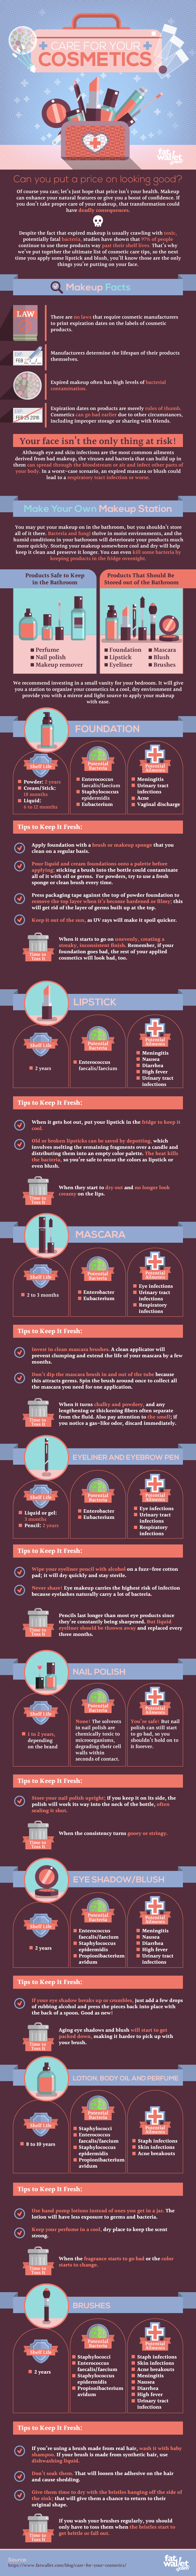 How to Care For Your Cosmetics